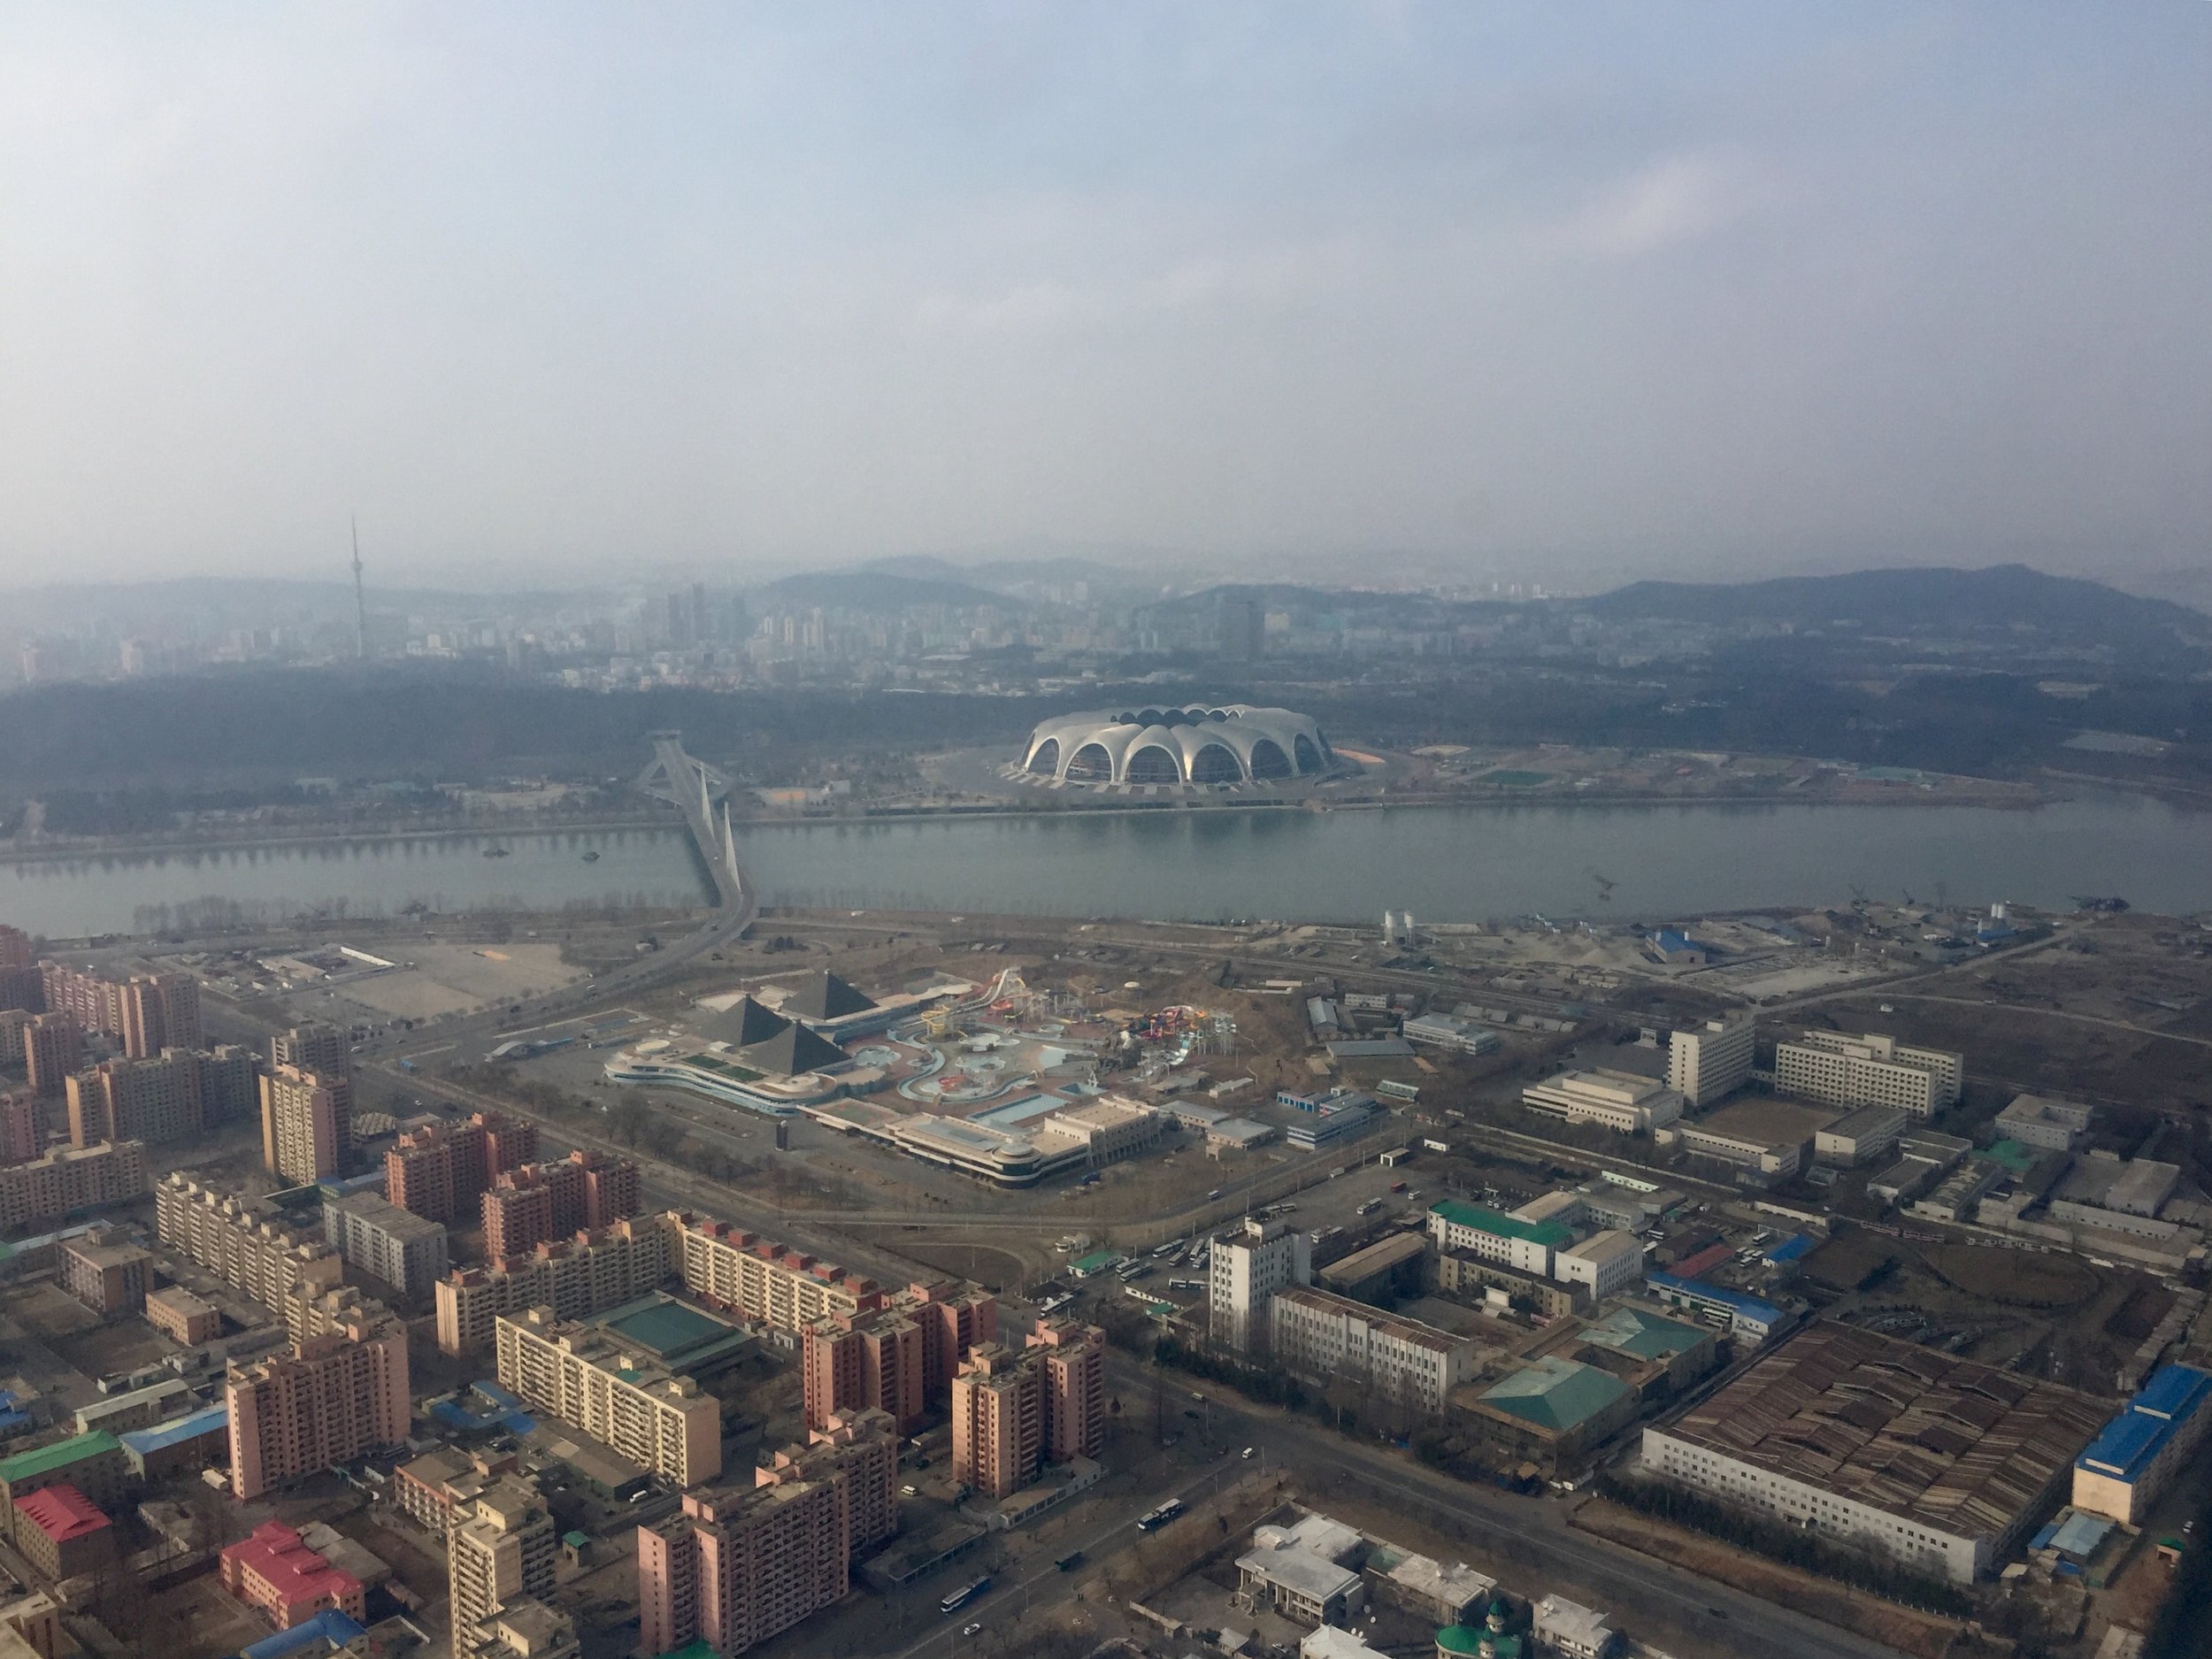  A view of northern Pyongyang as taken from an Air Koryo helicopter. The state-owned Munsu Waterpark can be seen in the foreground, and across the river is Mayday Stadium, the world's largest by capacity with 150,000 seats. (Photo by Ethan Jakob Craft.) 